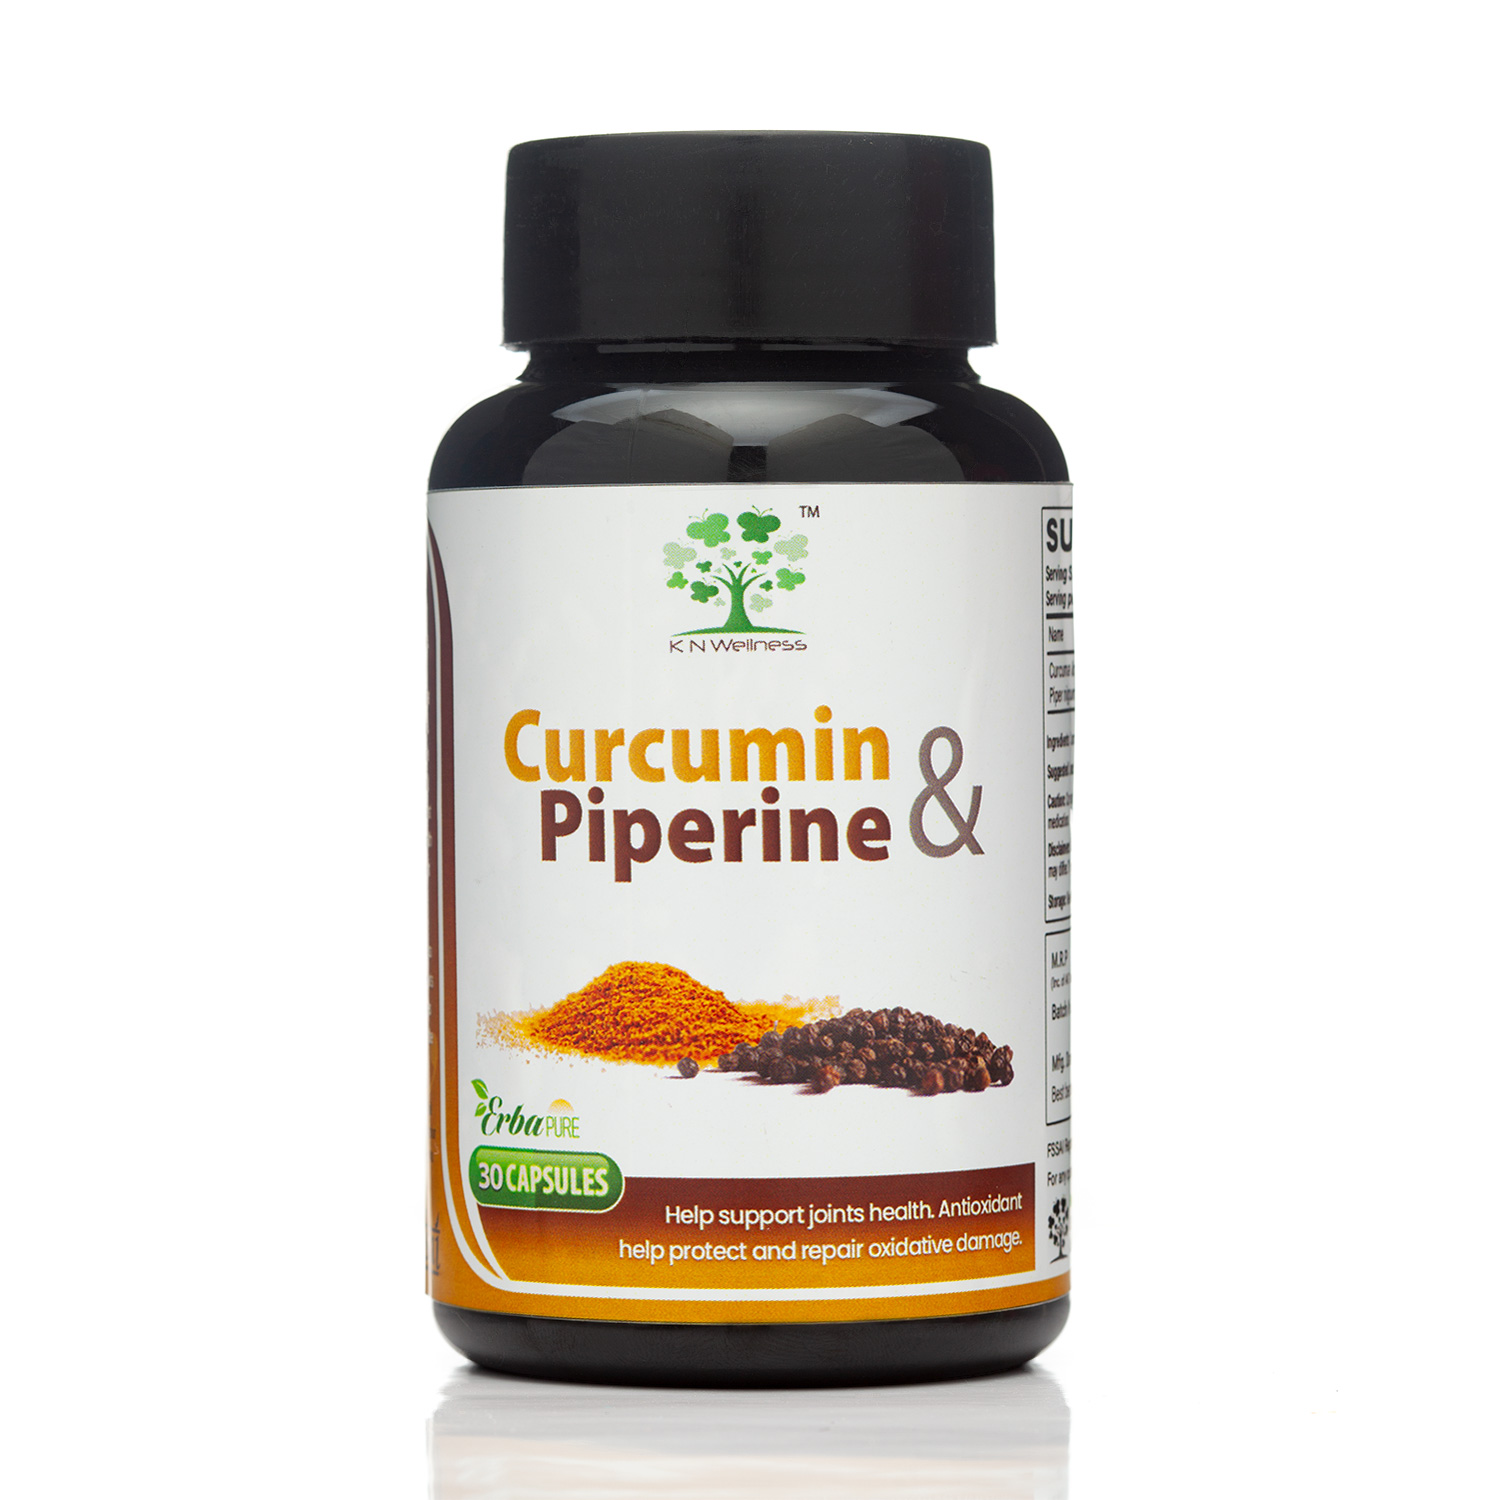 Curcumin and Piperine Extract